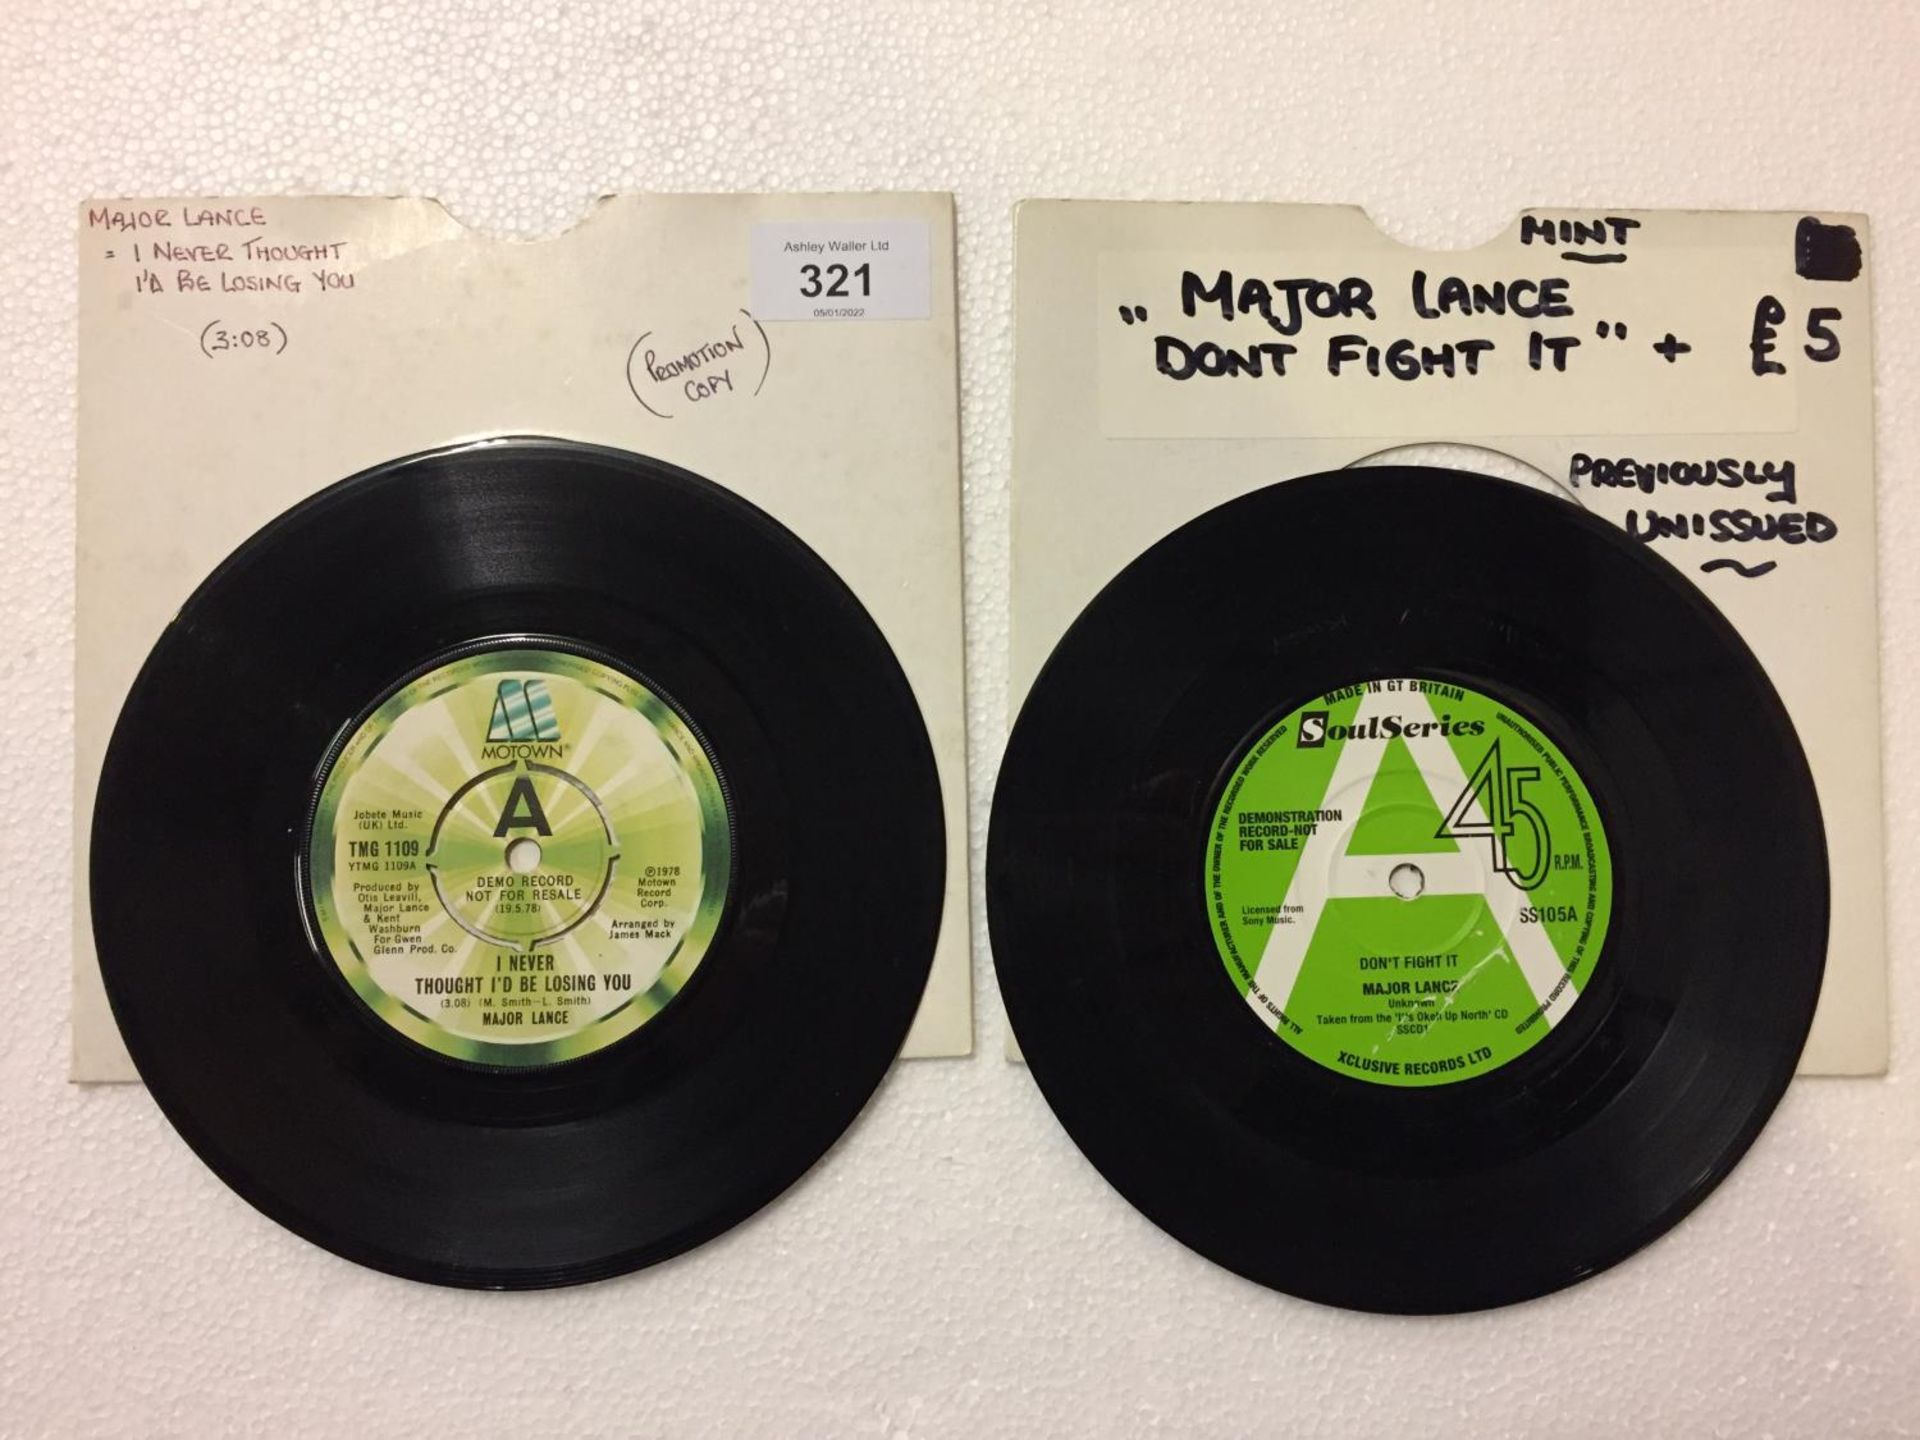 TWO 7 INCH VINYL RECORDS BY MAJOR LANCE TO INCLUDE 'DON'T FIGHT IT' (PREVIOUSLY UNISSUED) AND 'I